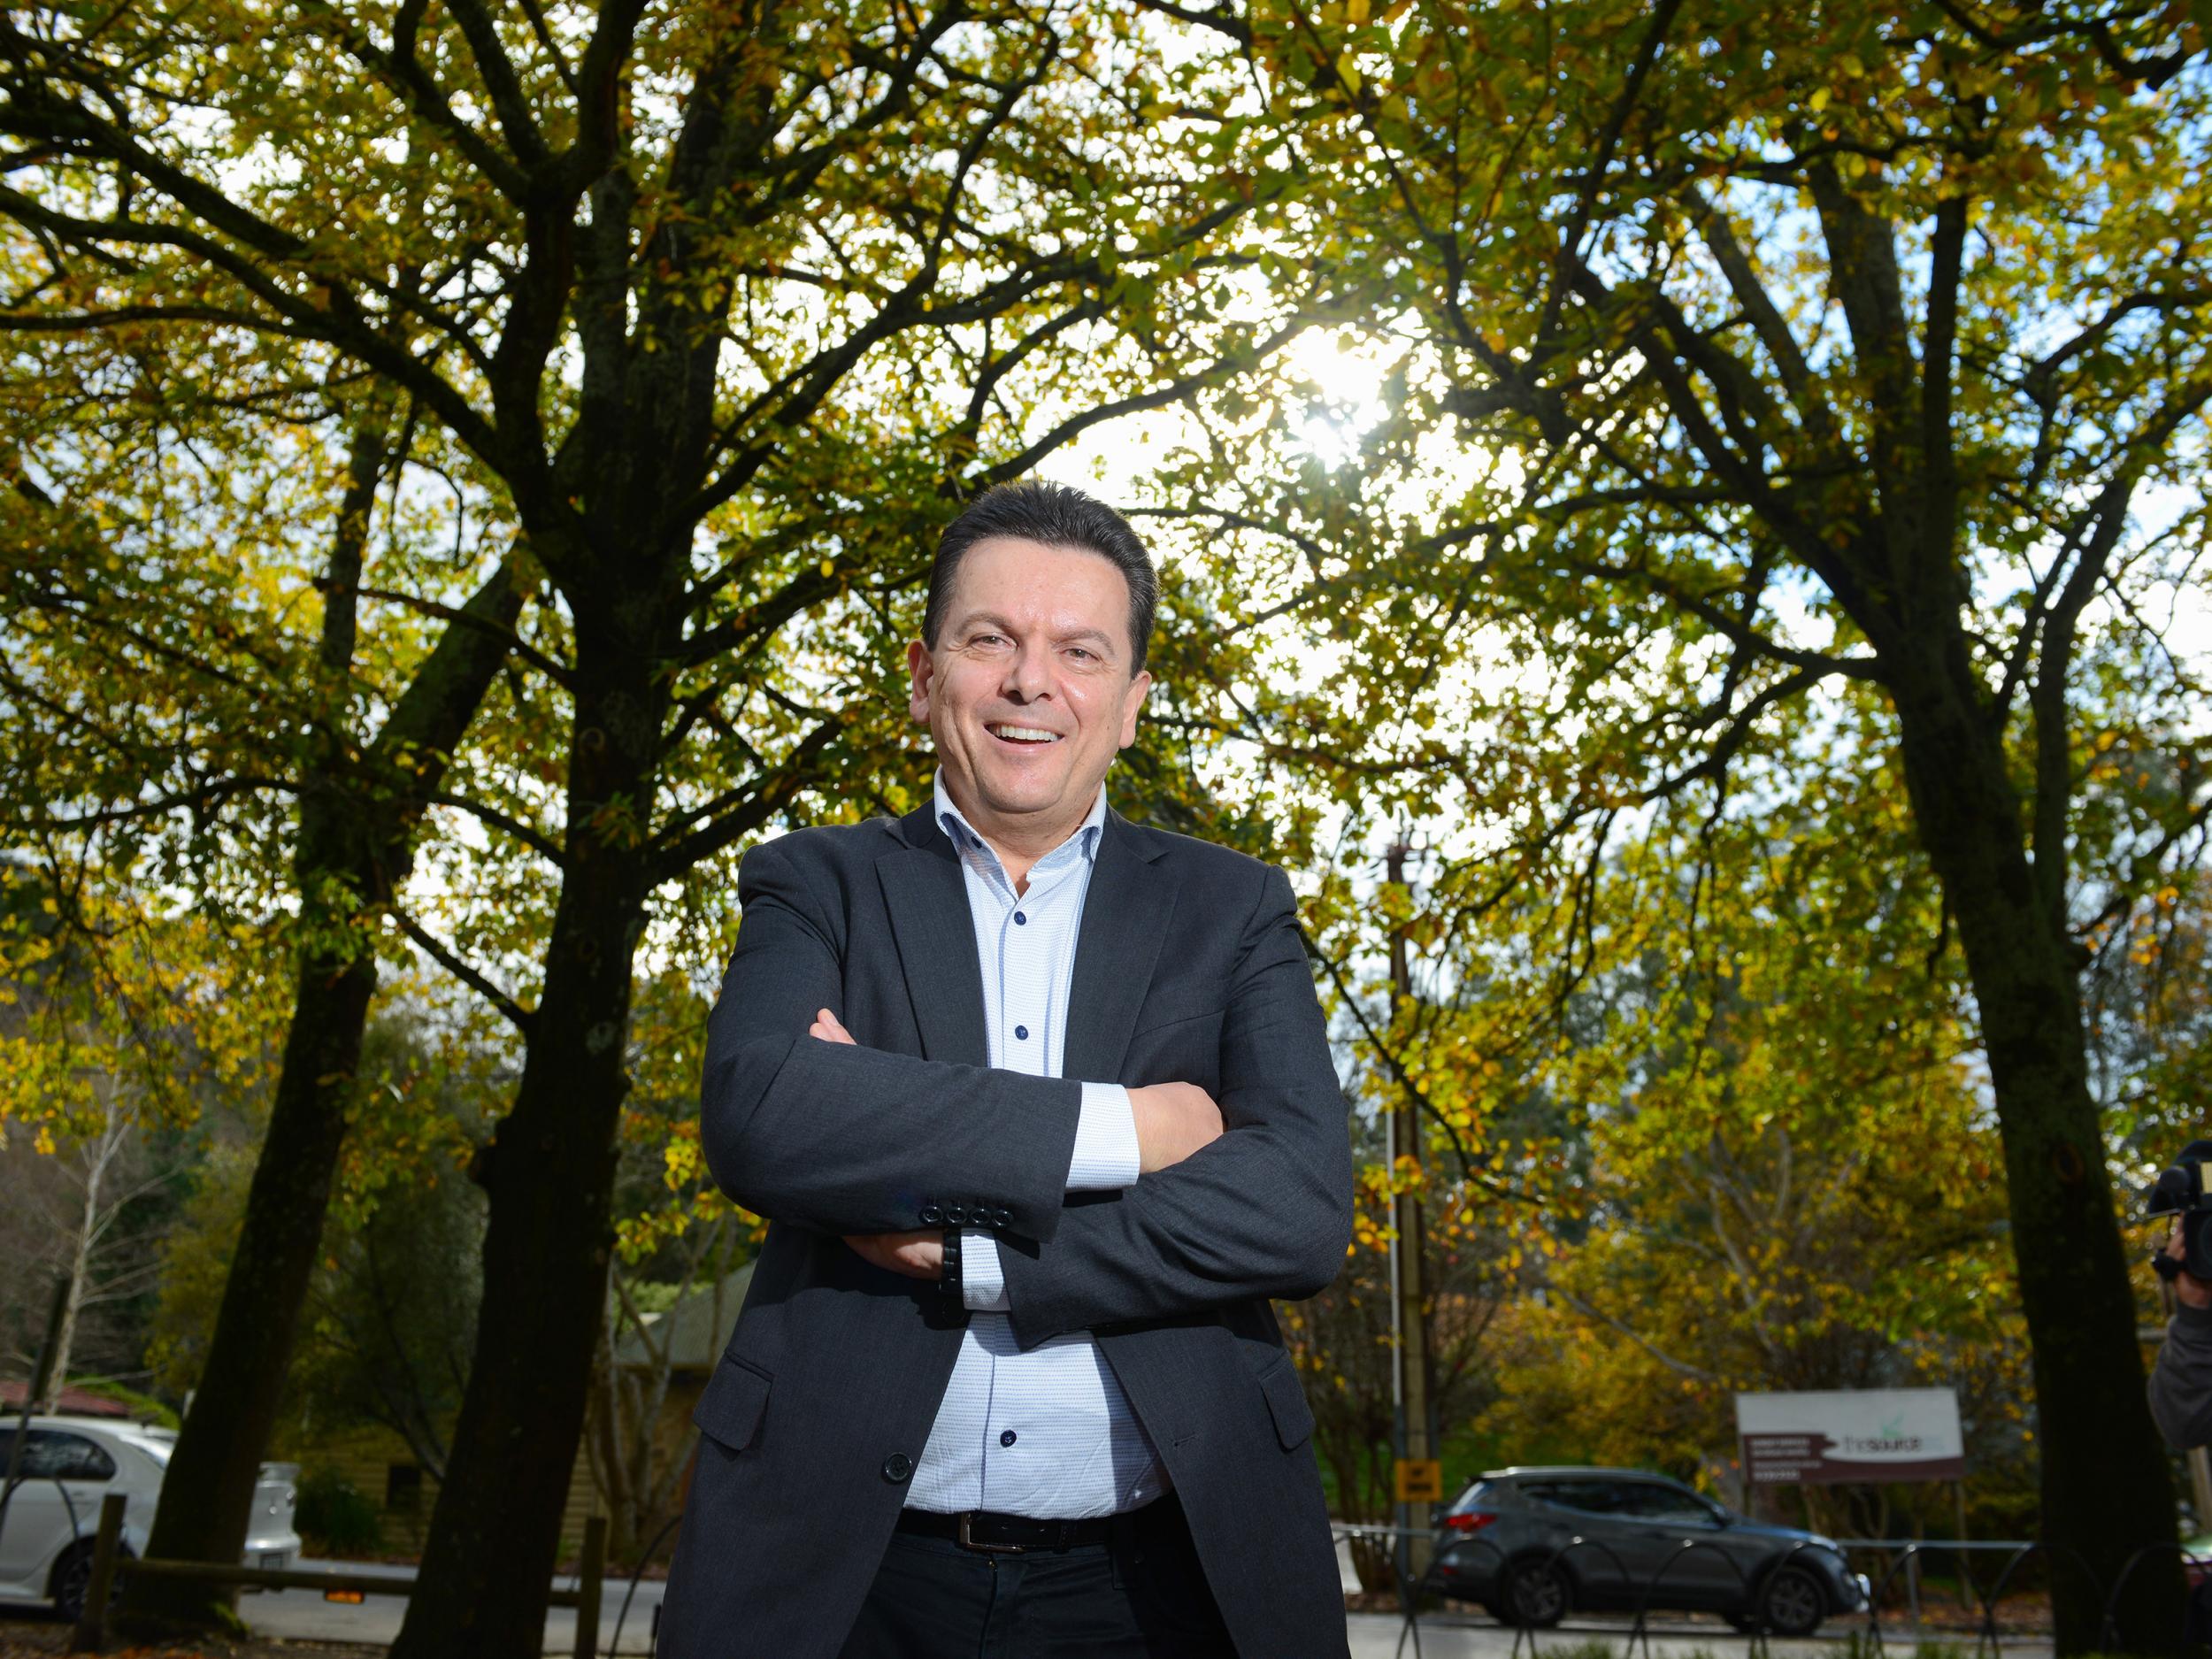 Nick Xenophon, leader of the Nick Xenophon Team political party